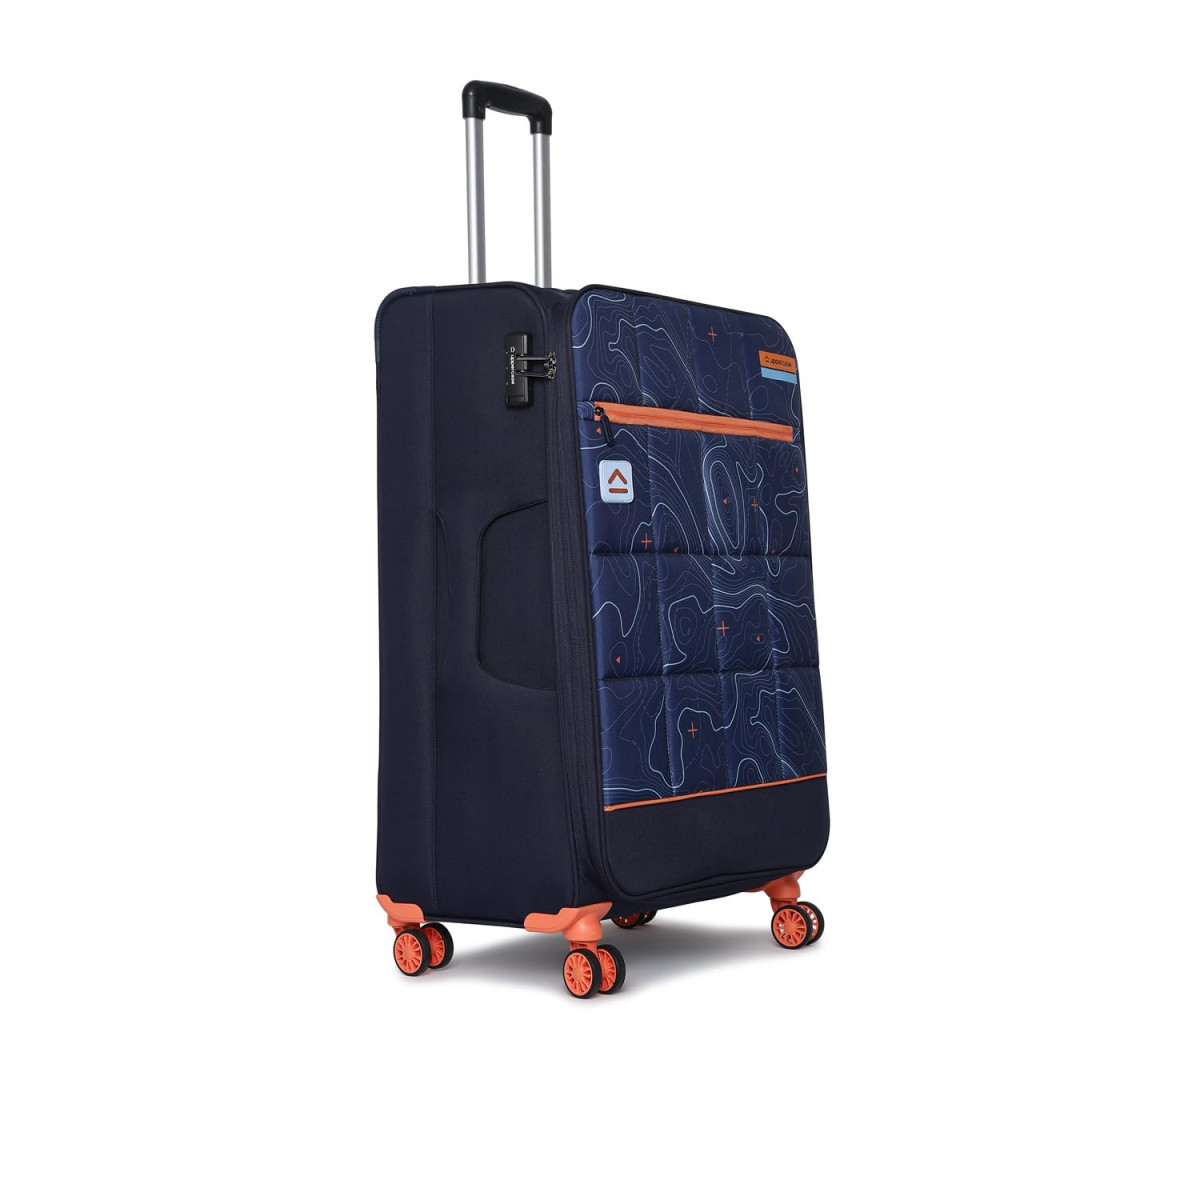 uppercase Topolite Trolley Bag Set Of 3 SML Sustainable Cabin  Check-In Luggage Soft Printed Luggage Combination Lock 8 Wheel Suitcase For Unisex 2500 Days Warranty Blue Polyester Spinner